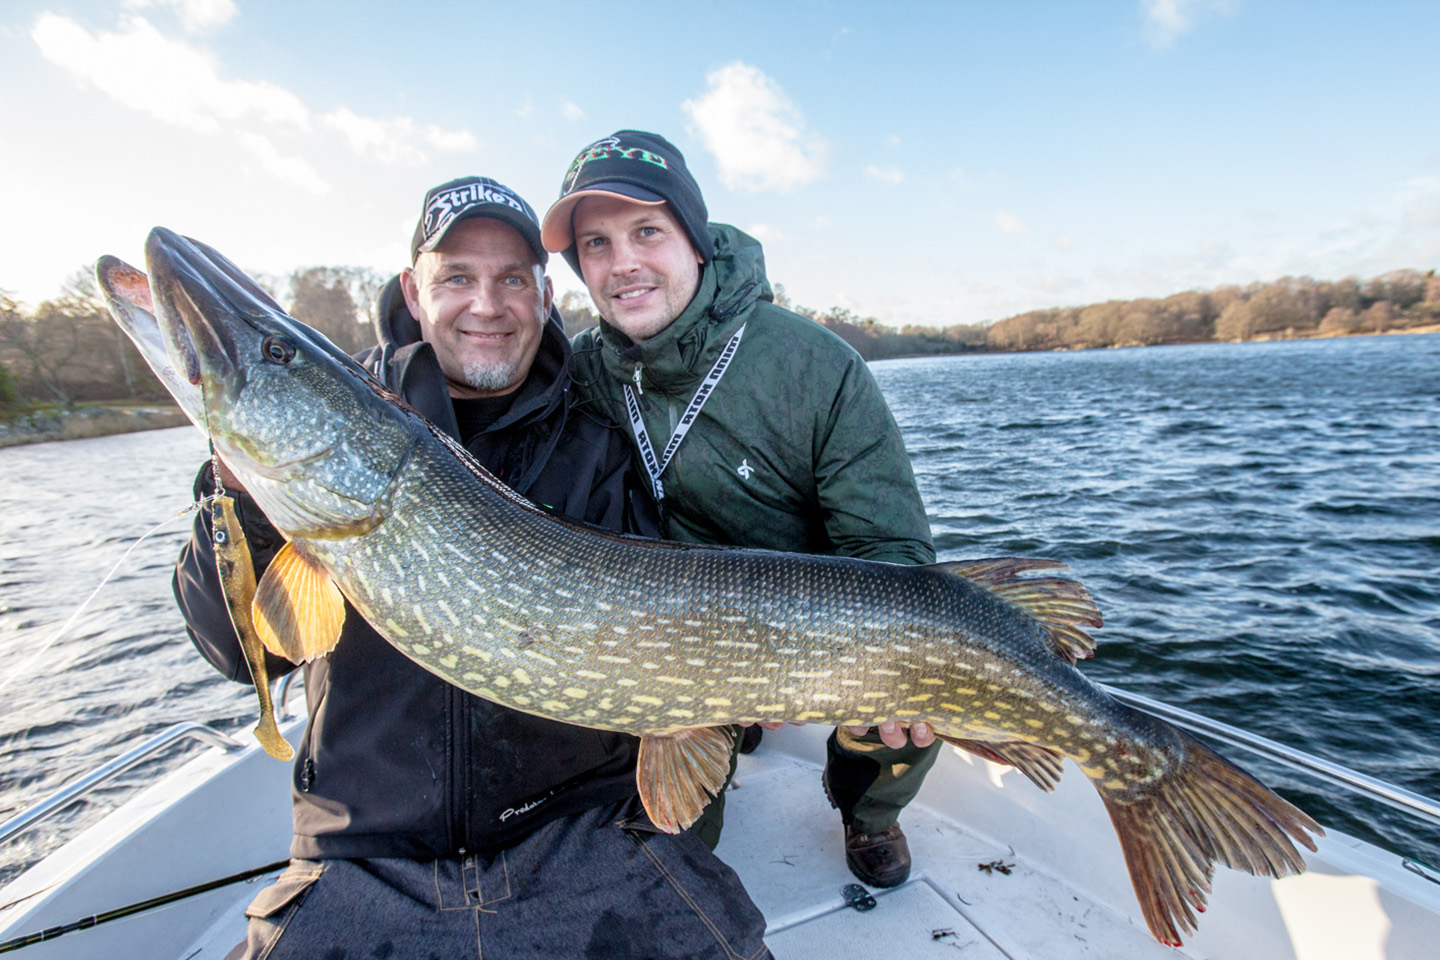 Two anglers on a boat holding a trophy-sized Northern Pike with blue sky and water behind them. The Pike has a large lure handing out of its mouth.